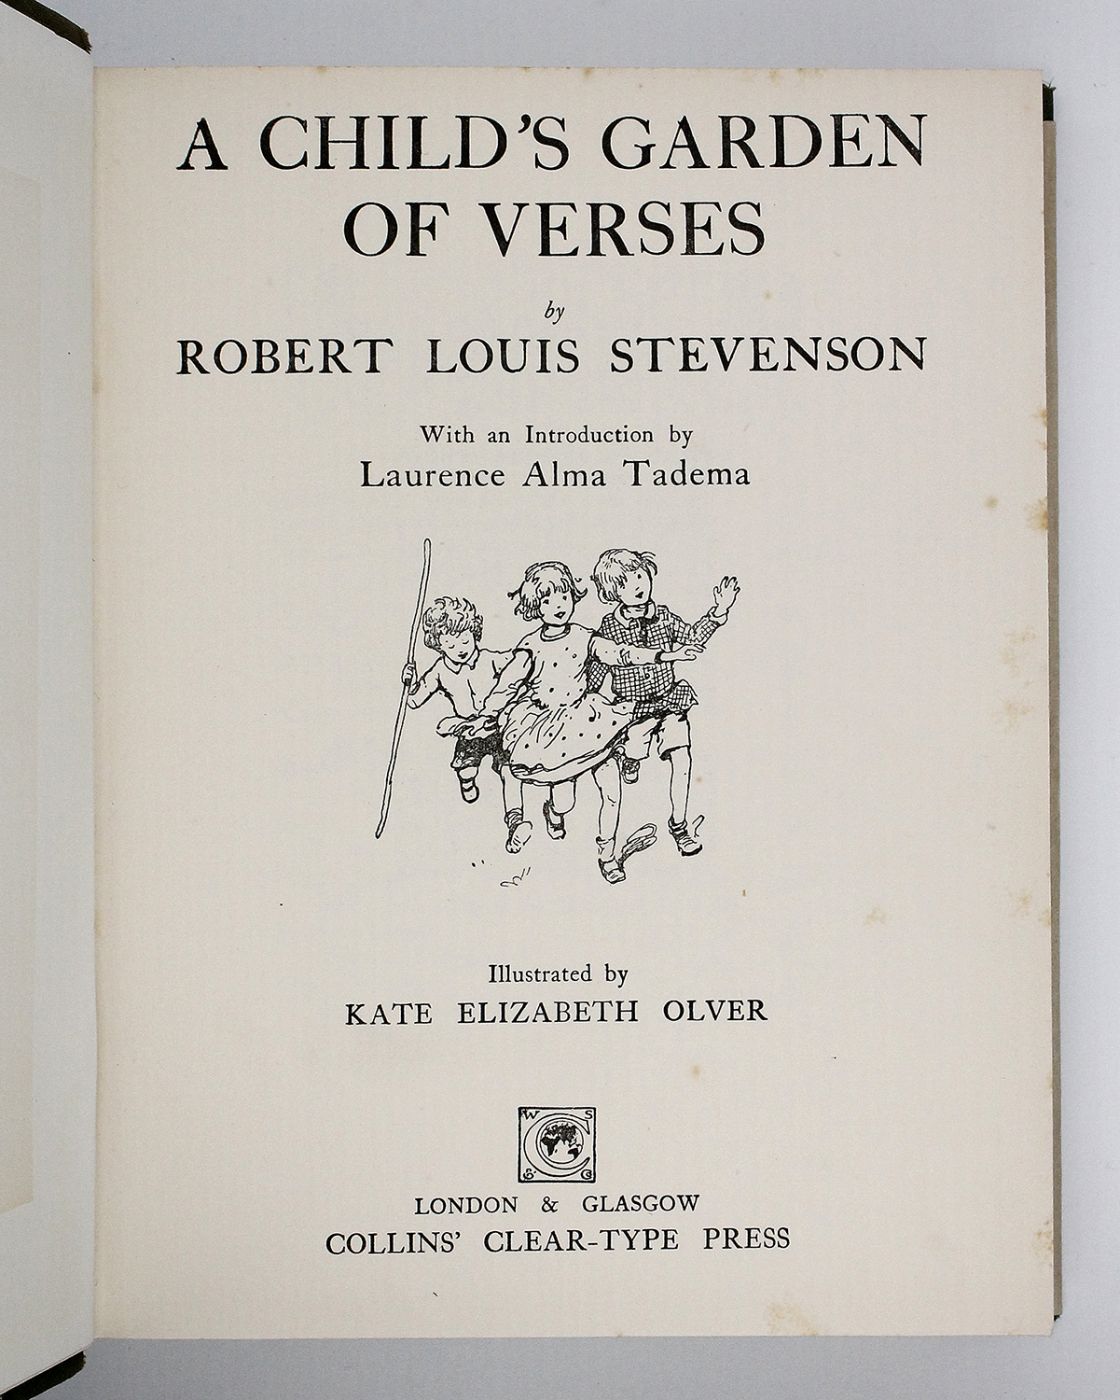 A CHILD'S GARDEN OF VERSES -  image 2